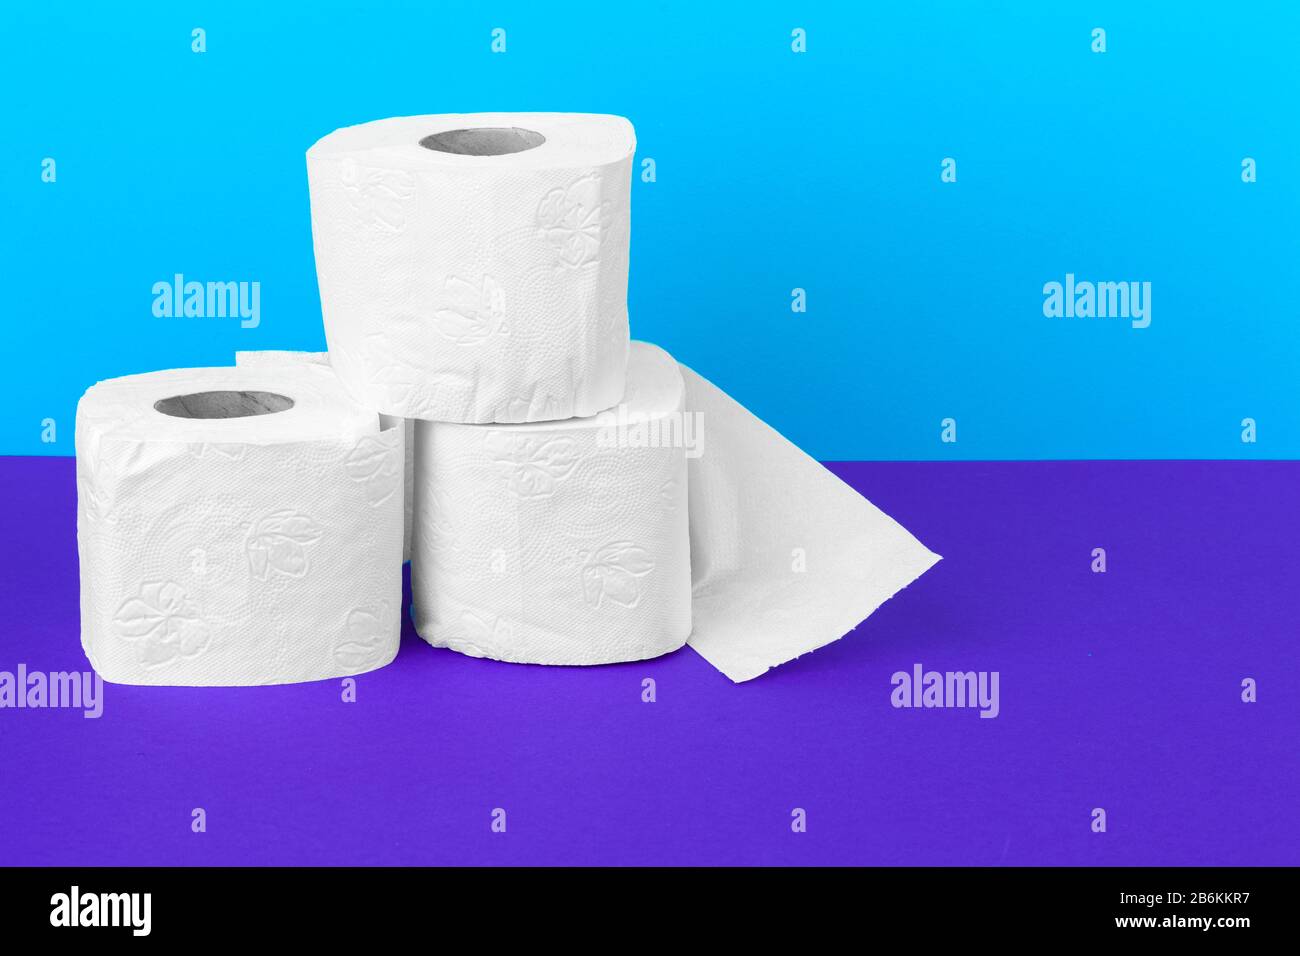 Toilet paper rolls isolated on white table with purple background Stock Photo